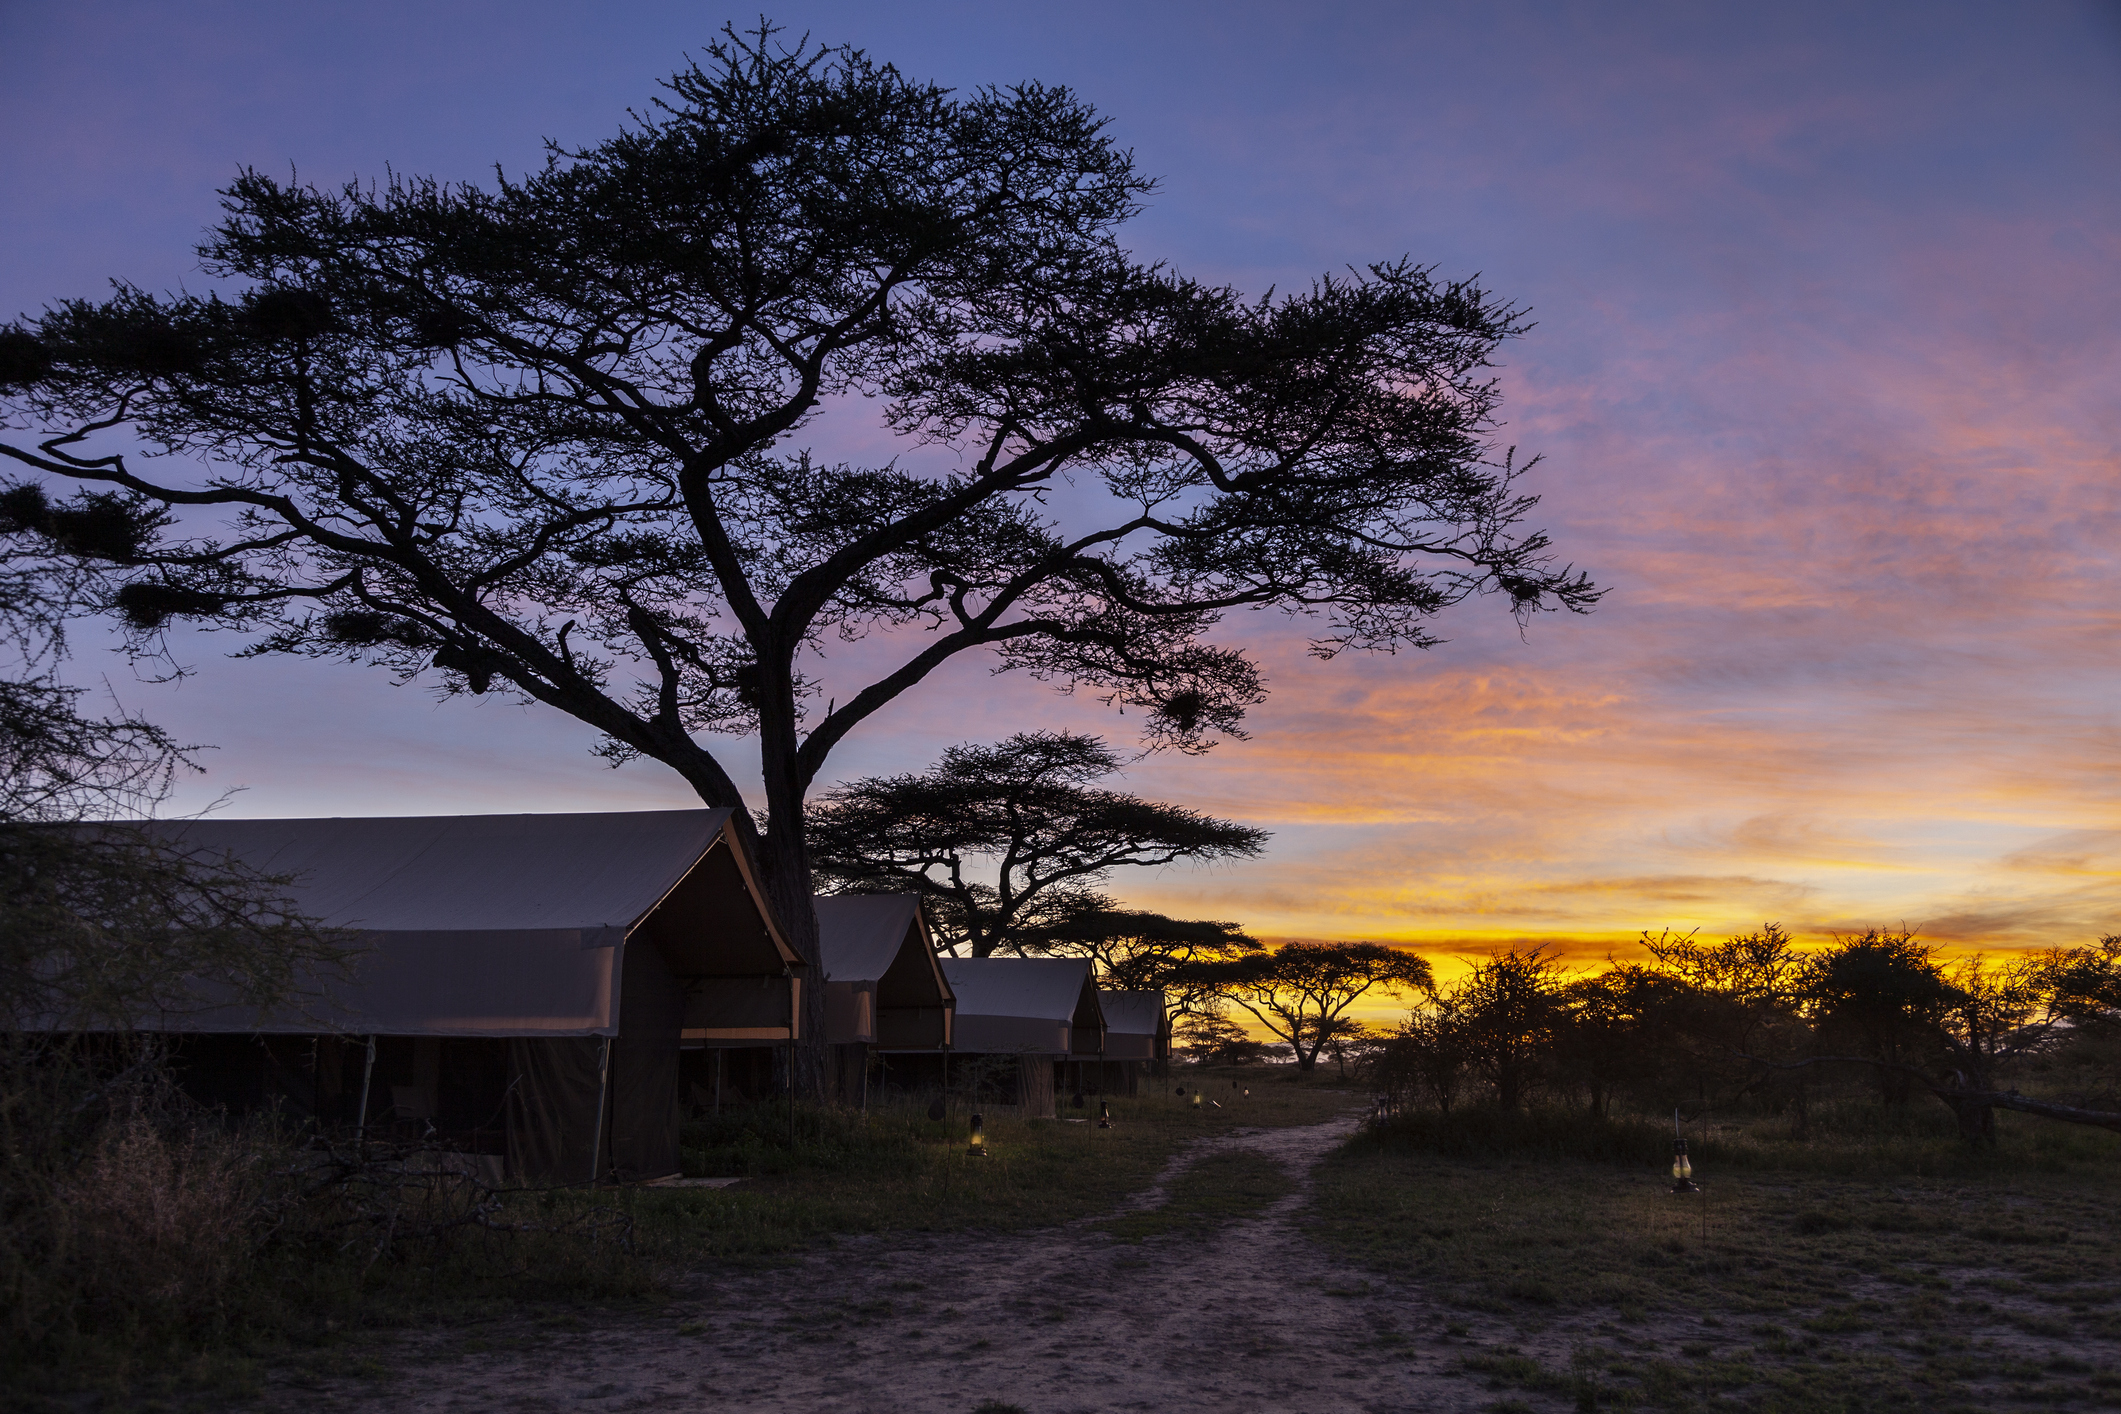 Tent camps in the Serengeti national park, Tanzania, Africa.